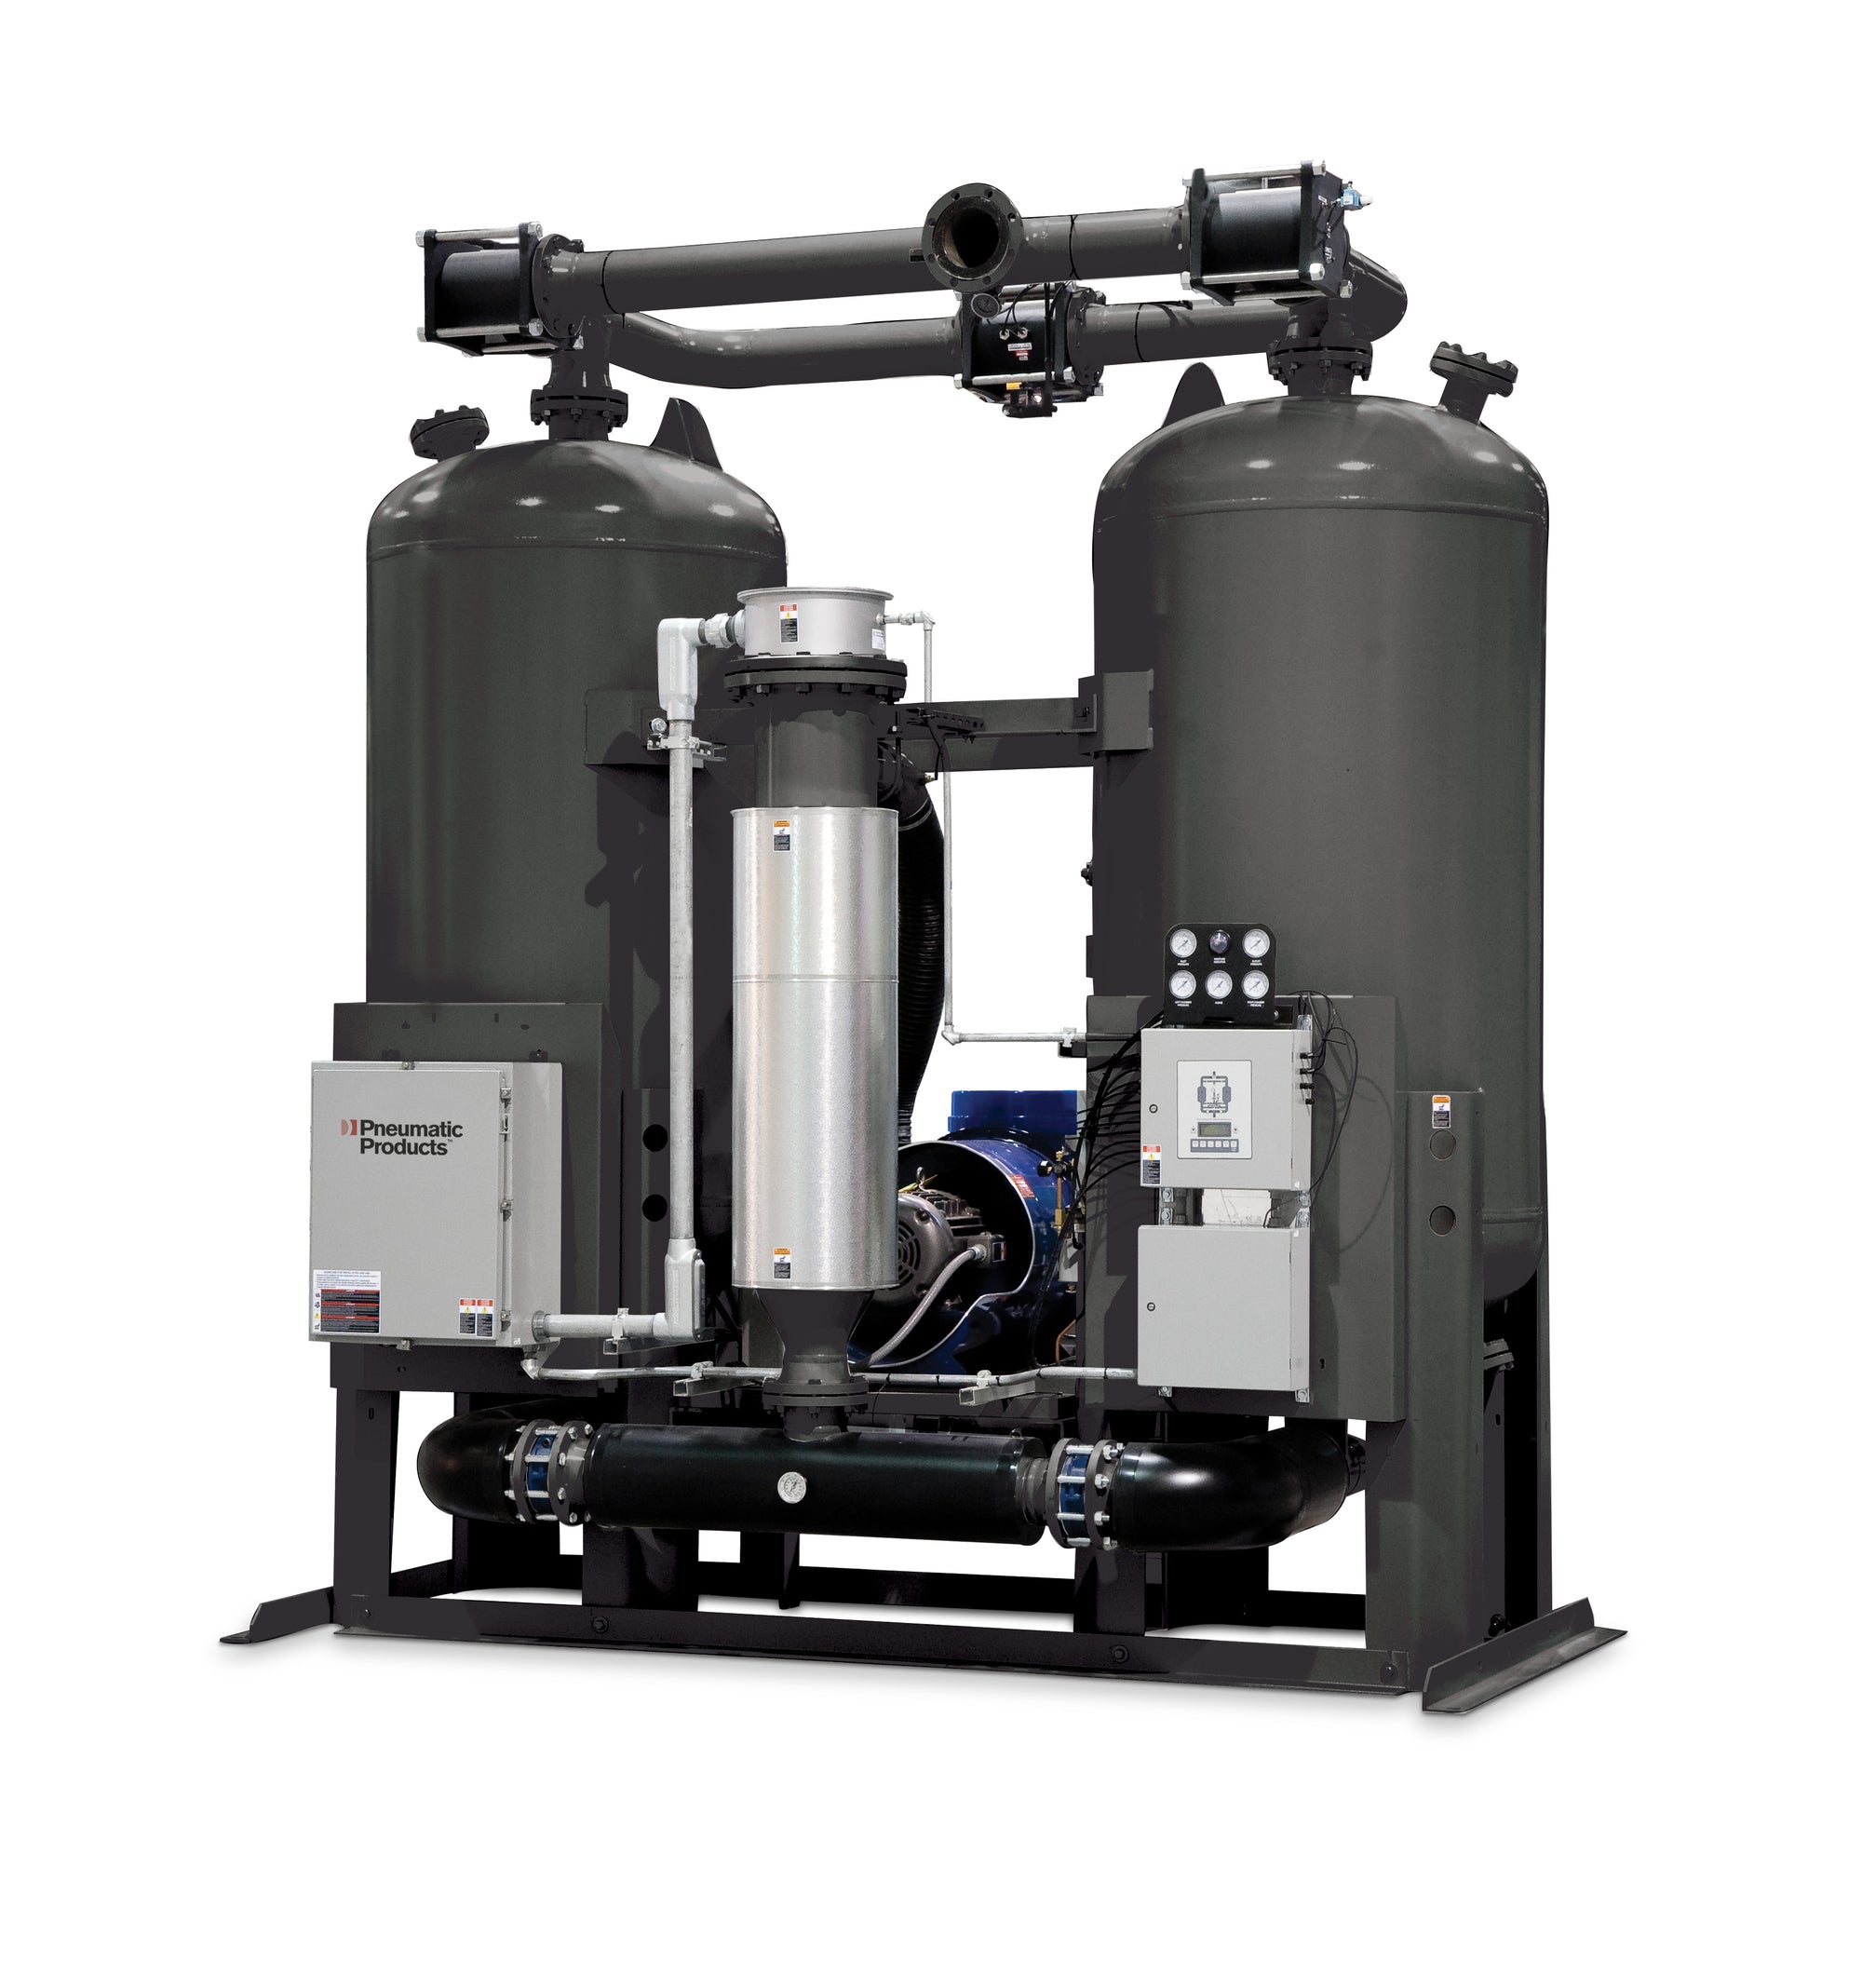 Pneumatic Products - CAB Series Compressed Air Dryer